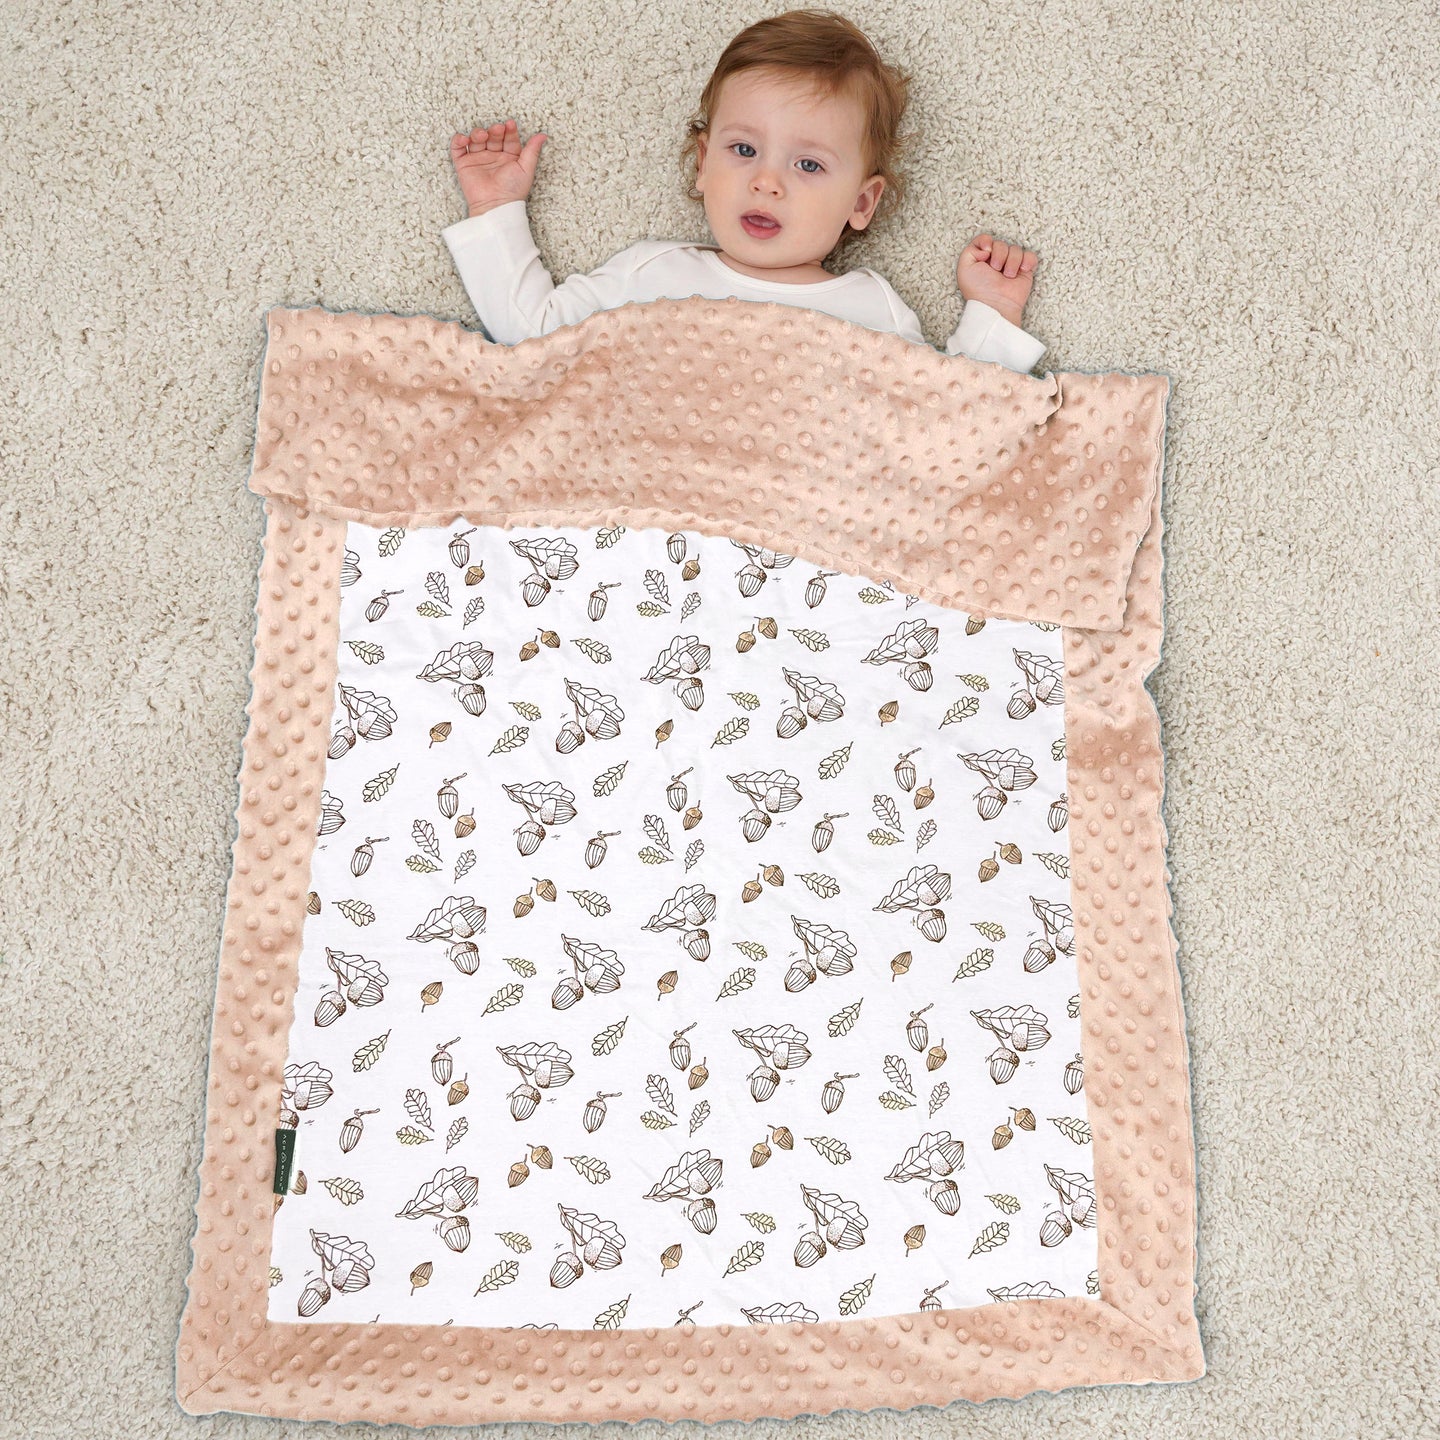 ACRABROS Baby Blankets Double Layer Dotted Backing 30X40 Inches,Linear Nuts